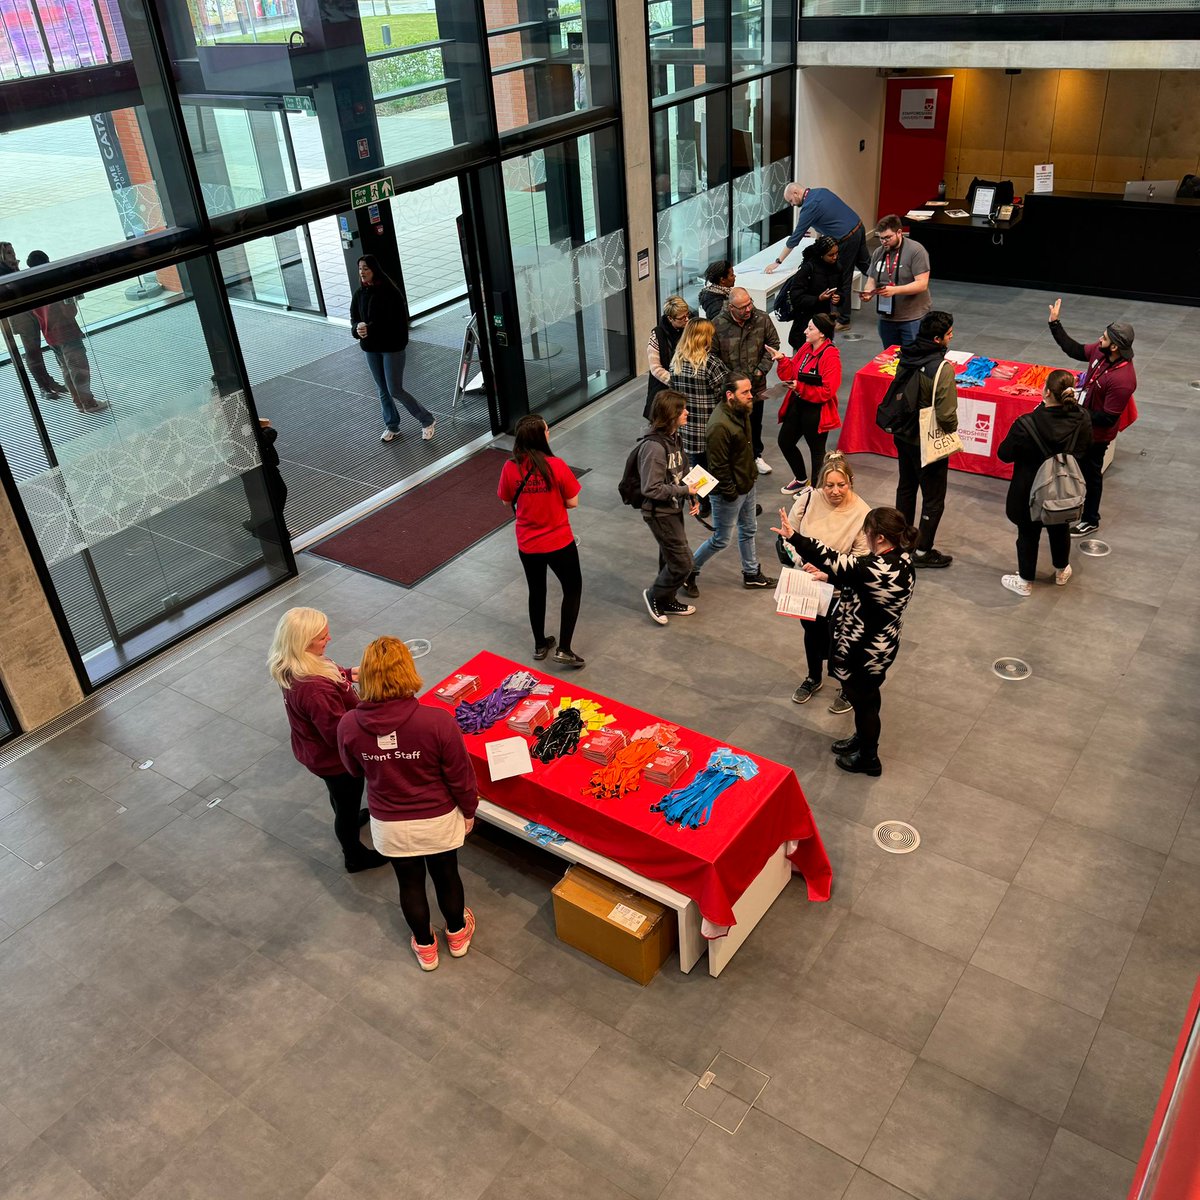 Today marks our final Offer Holder Day before we welcome our new students in September 👋 We’ve loved meeting you to immerse you into what it’s like to be a student at Staffordshire University ❤️ 👣 Check out your next steps in our Offer Holder Hub: staffs.ac.uk/offer-holder